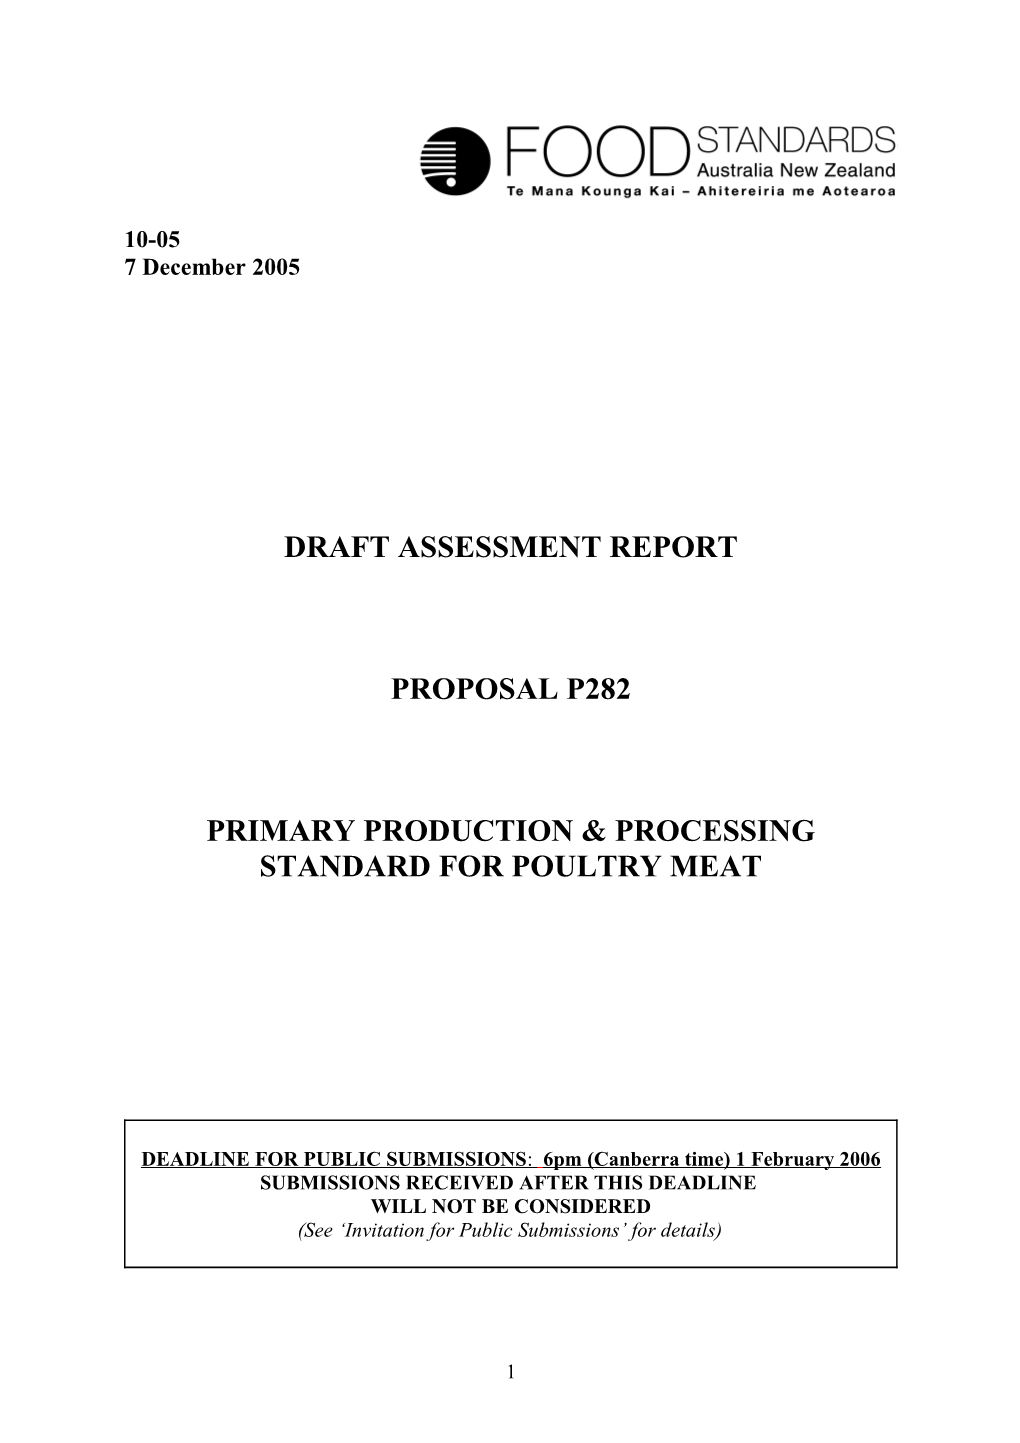 Primary Production & Processing Standard for Poultry Meat